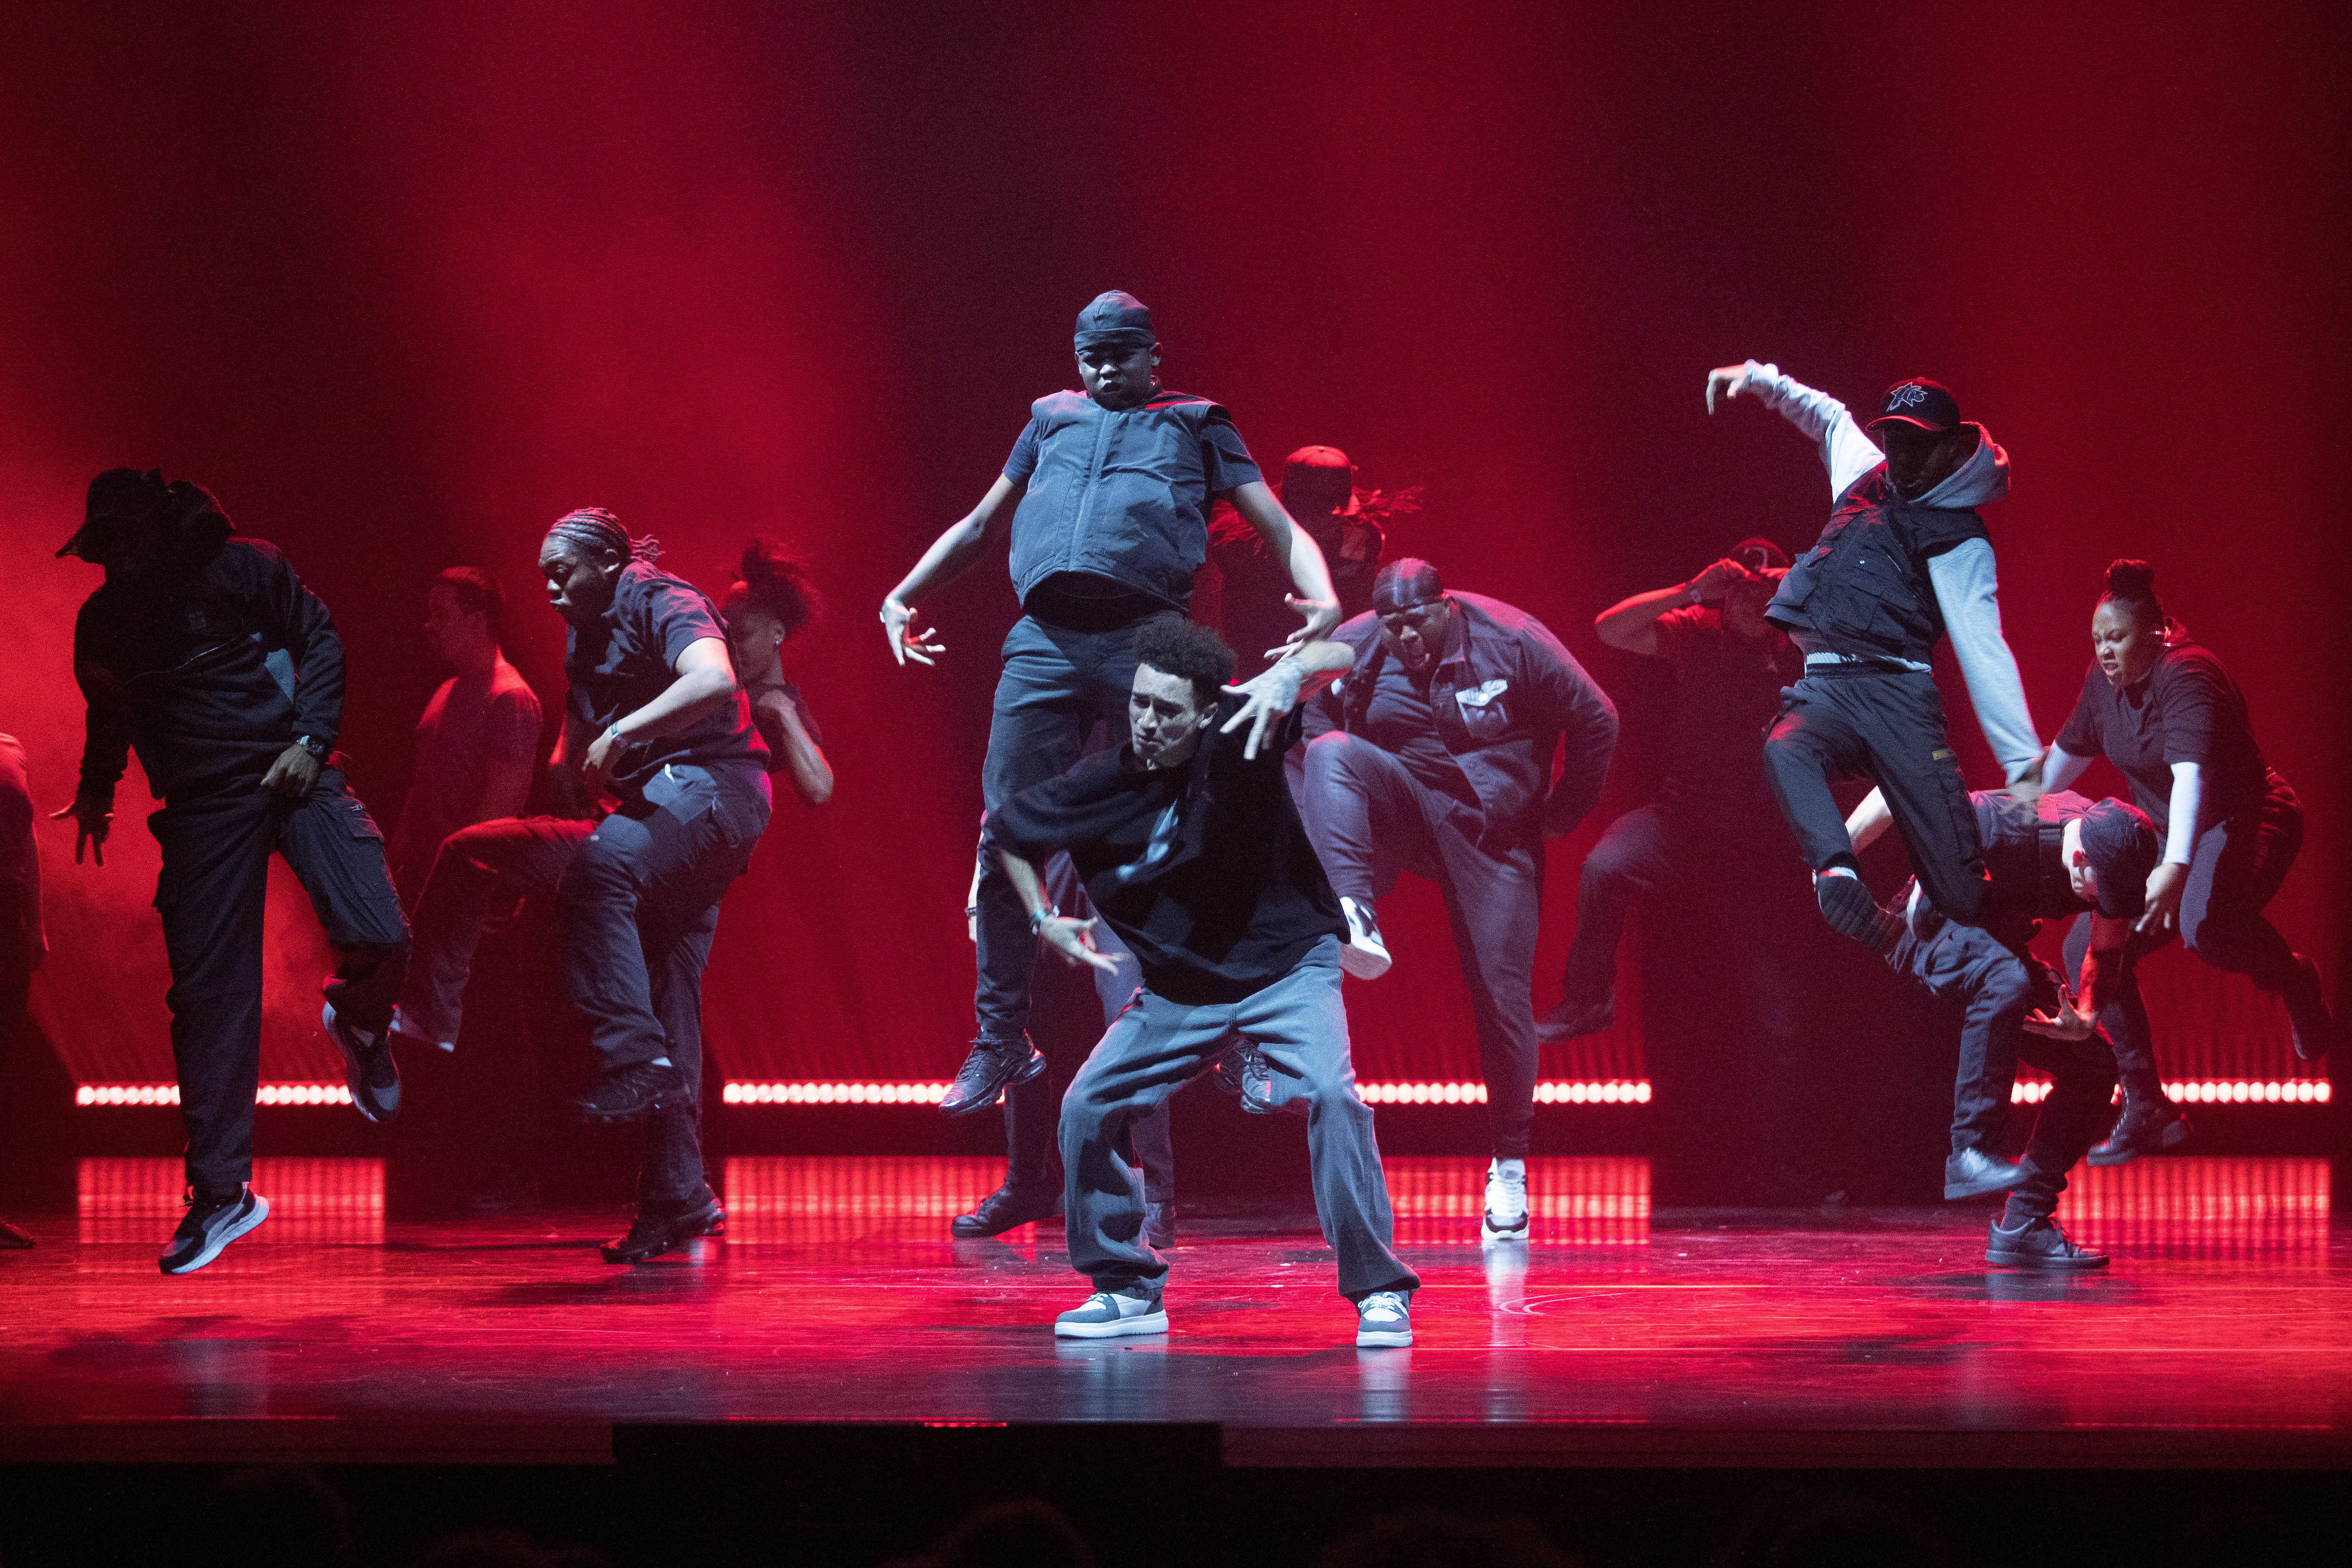 Breakin’ Convention Festival returns to Sadler’s Wells this Early May Bank Holiday